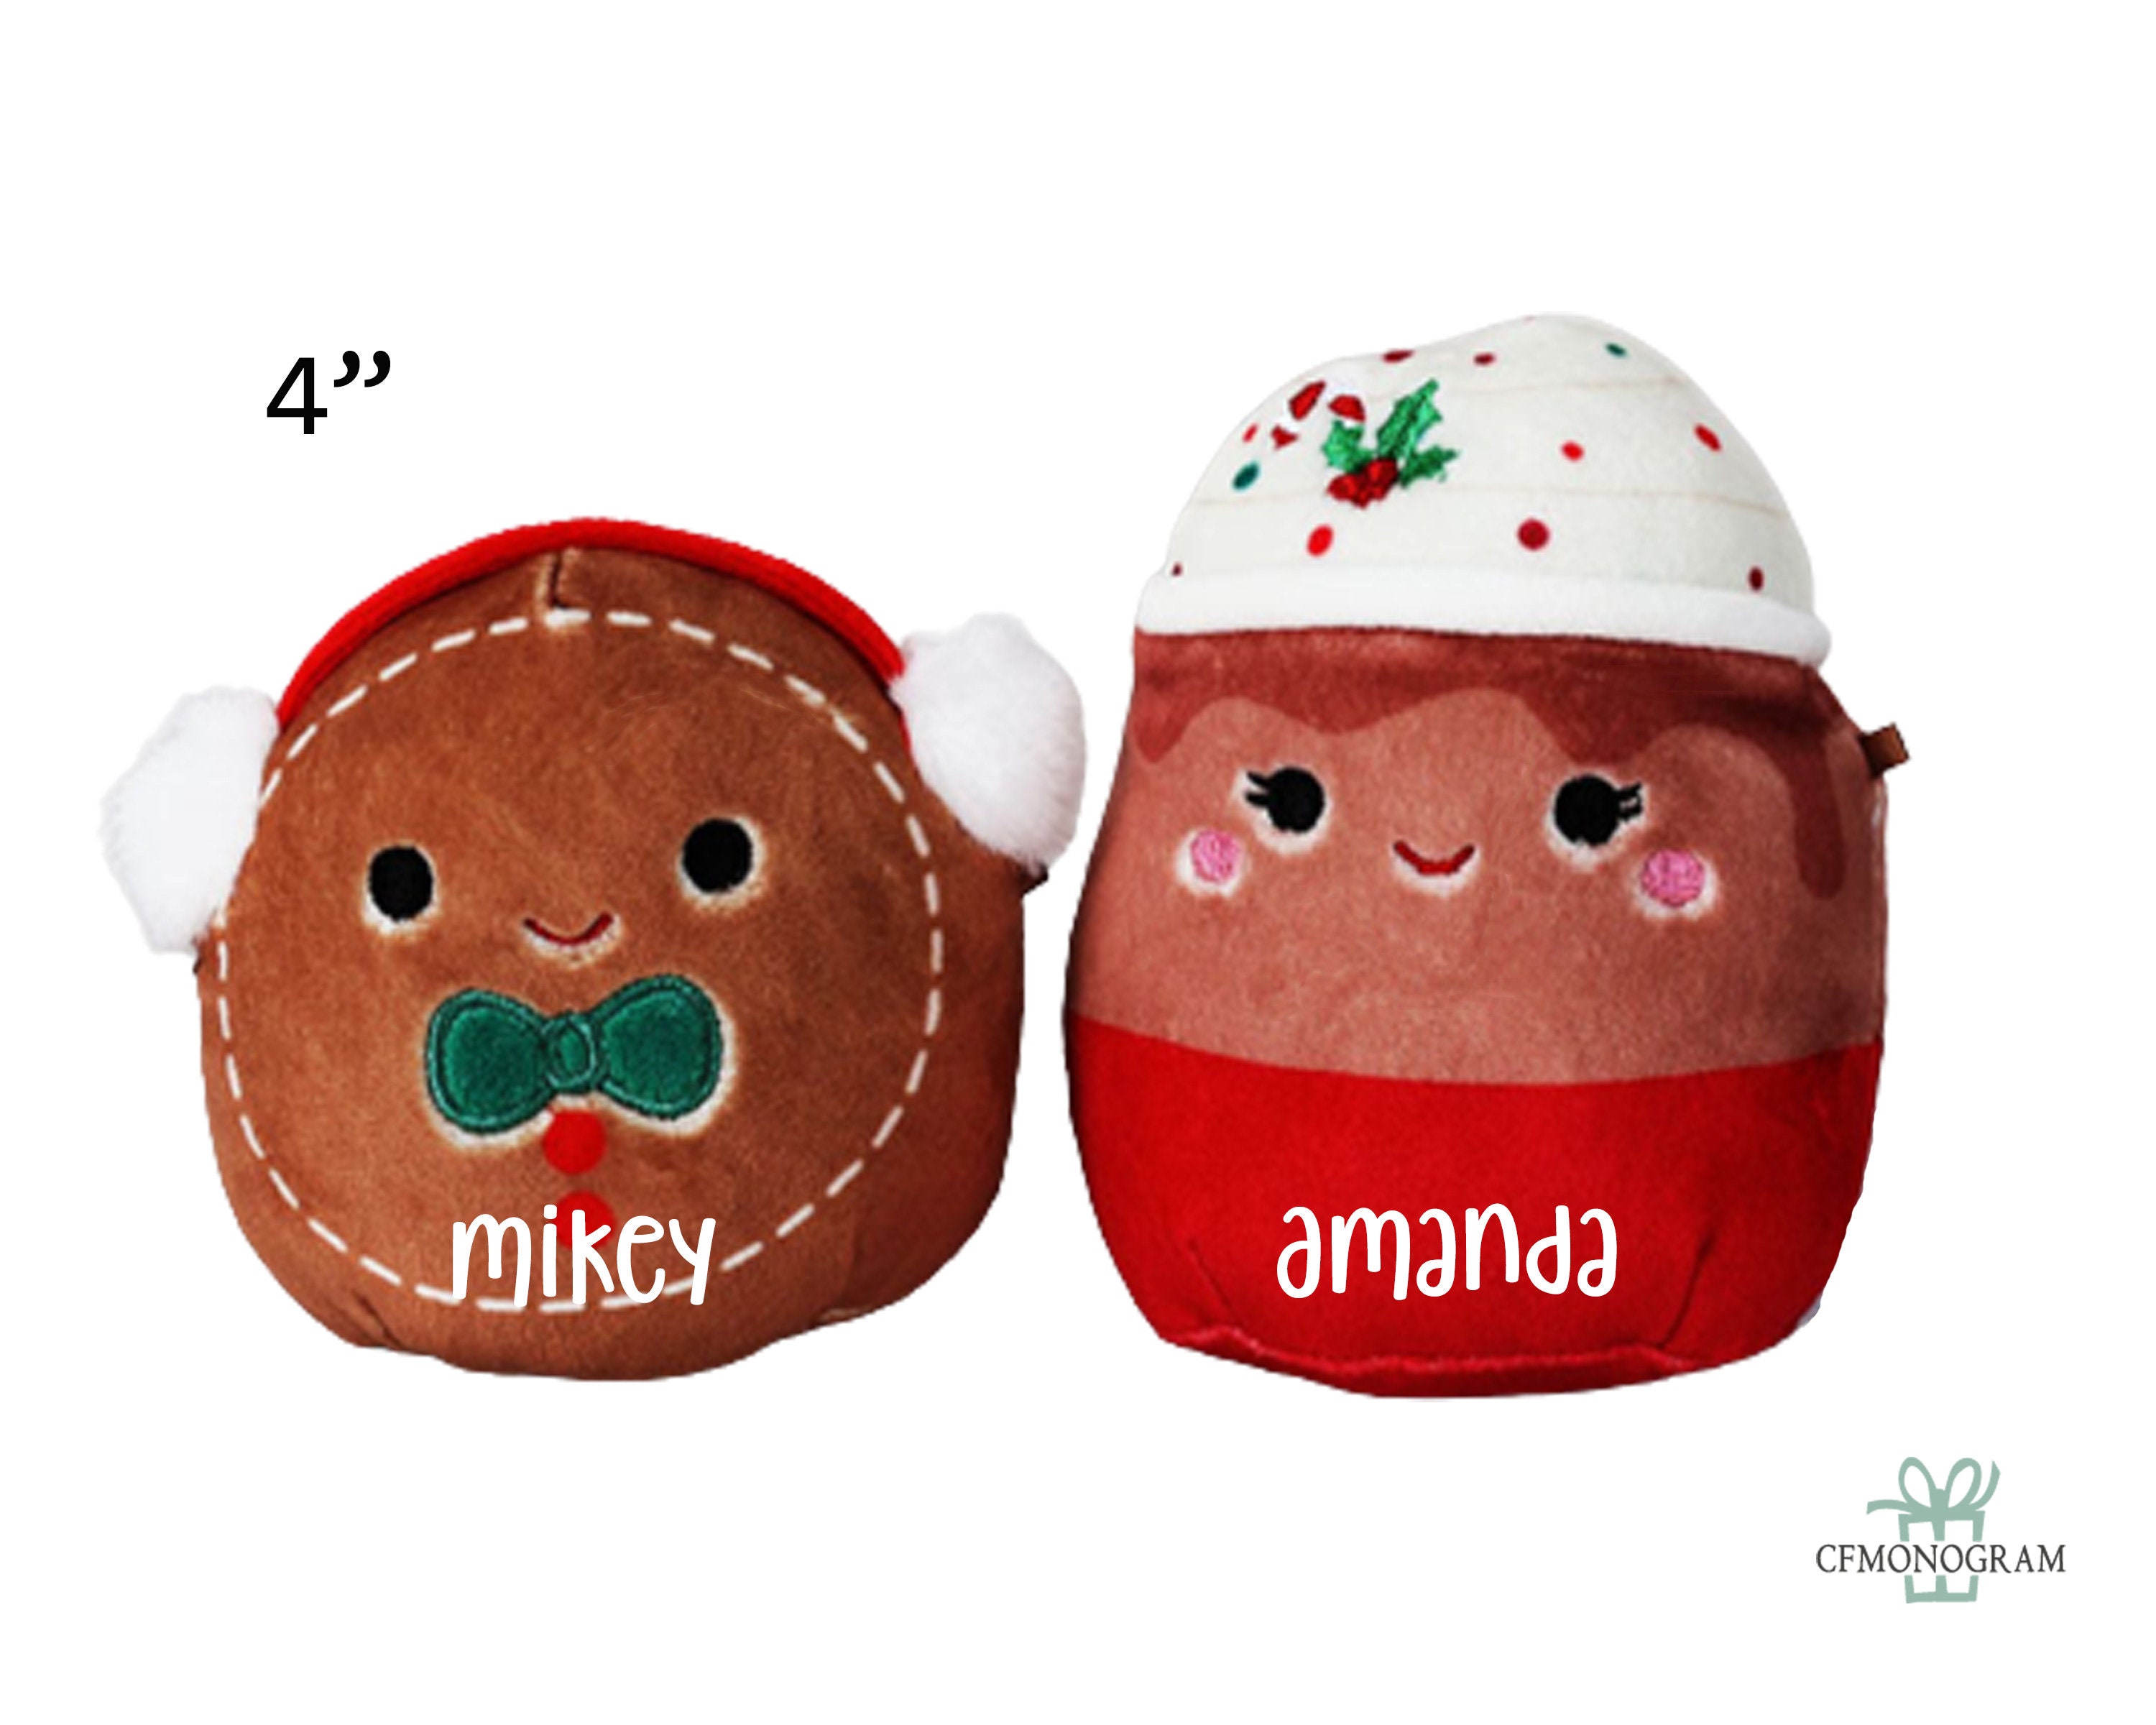 Squishmallows Ornament Gina the Gingerbread Woman 4 Plush HOLIDAY